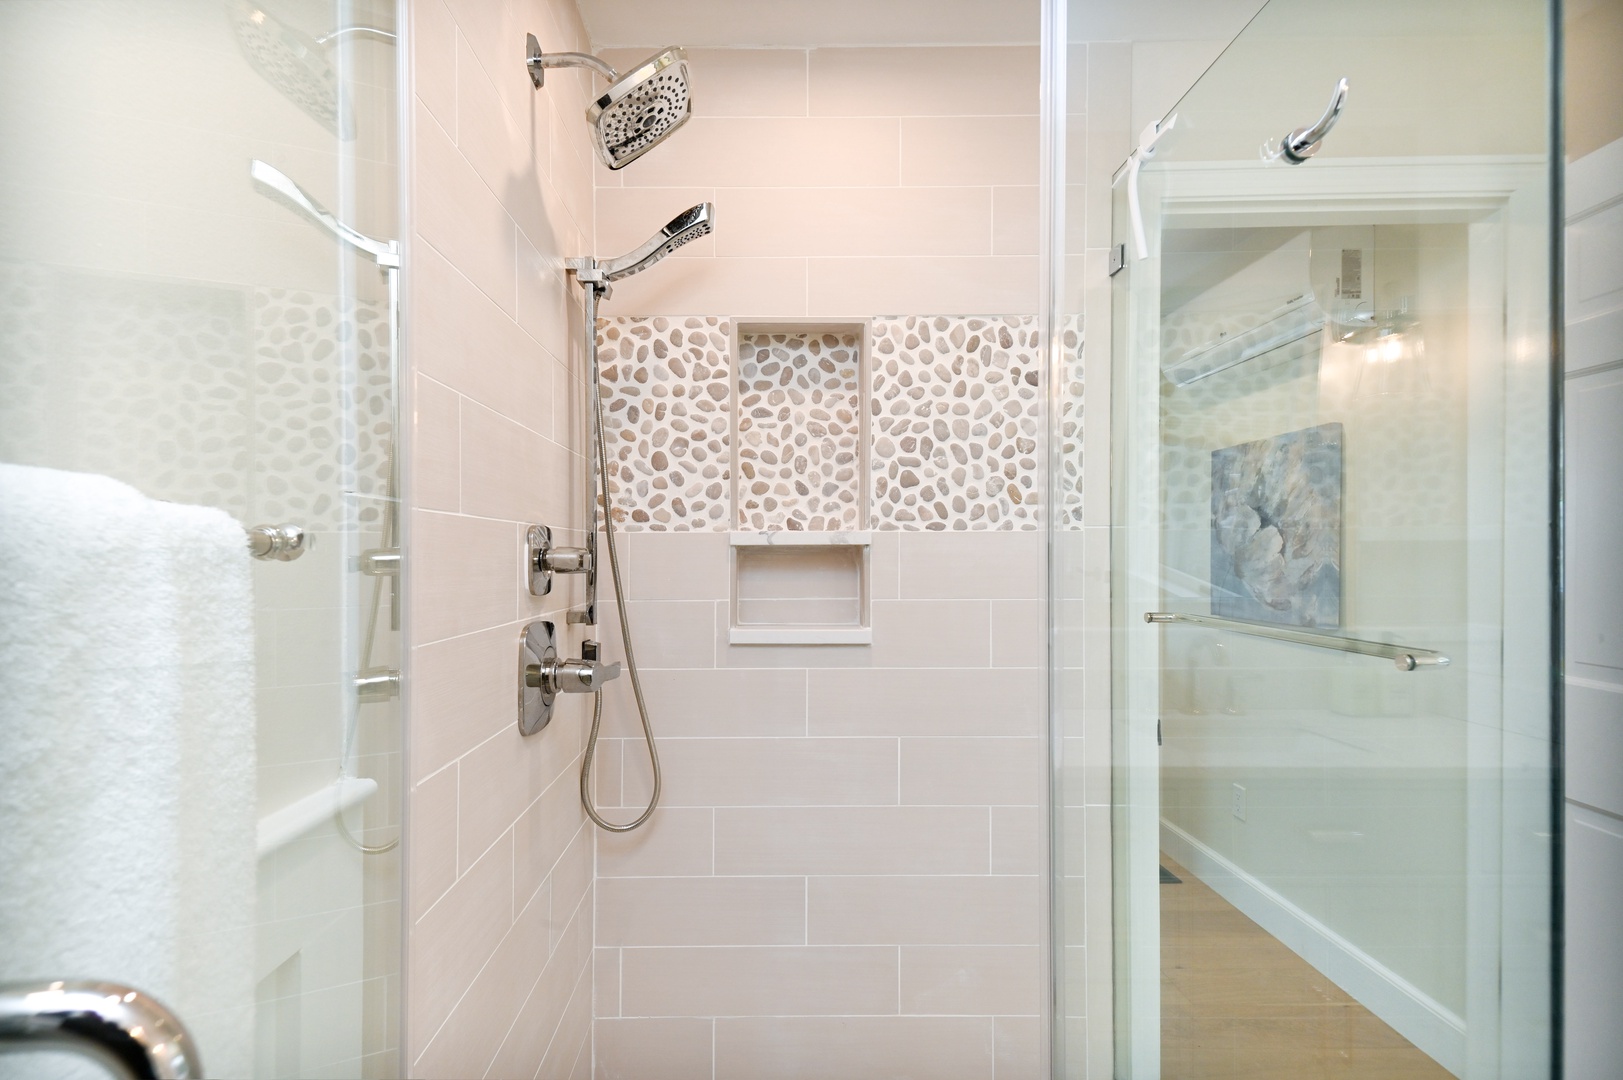 Harbor View’s chic ensuite bath includes a single vanity & luxe glass shower